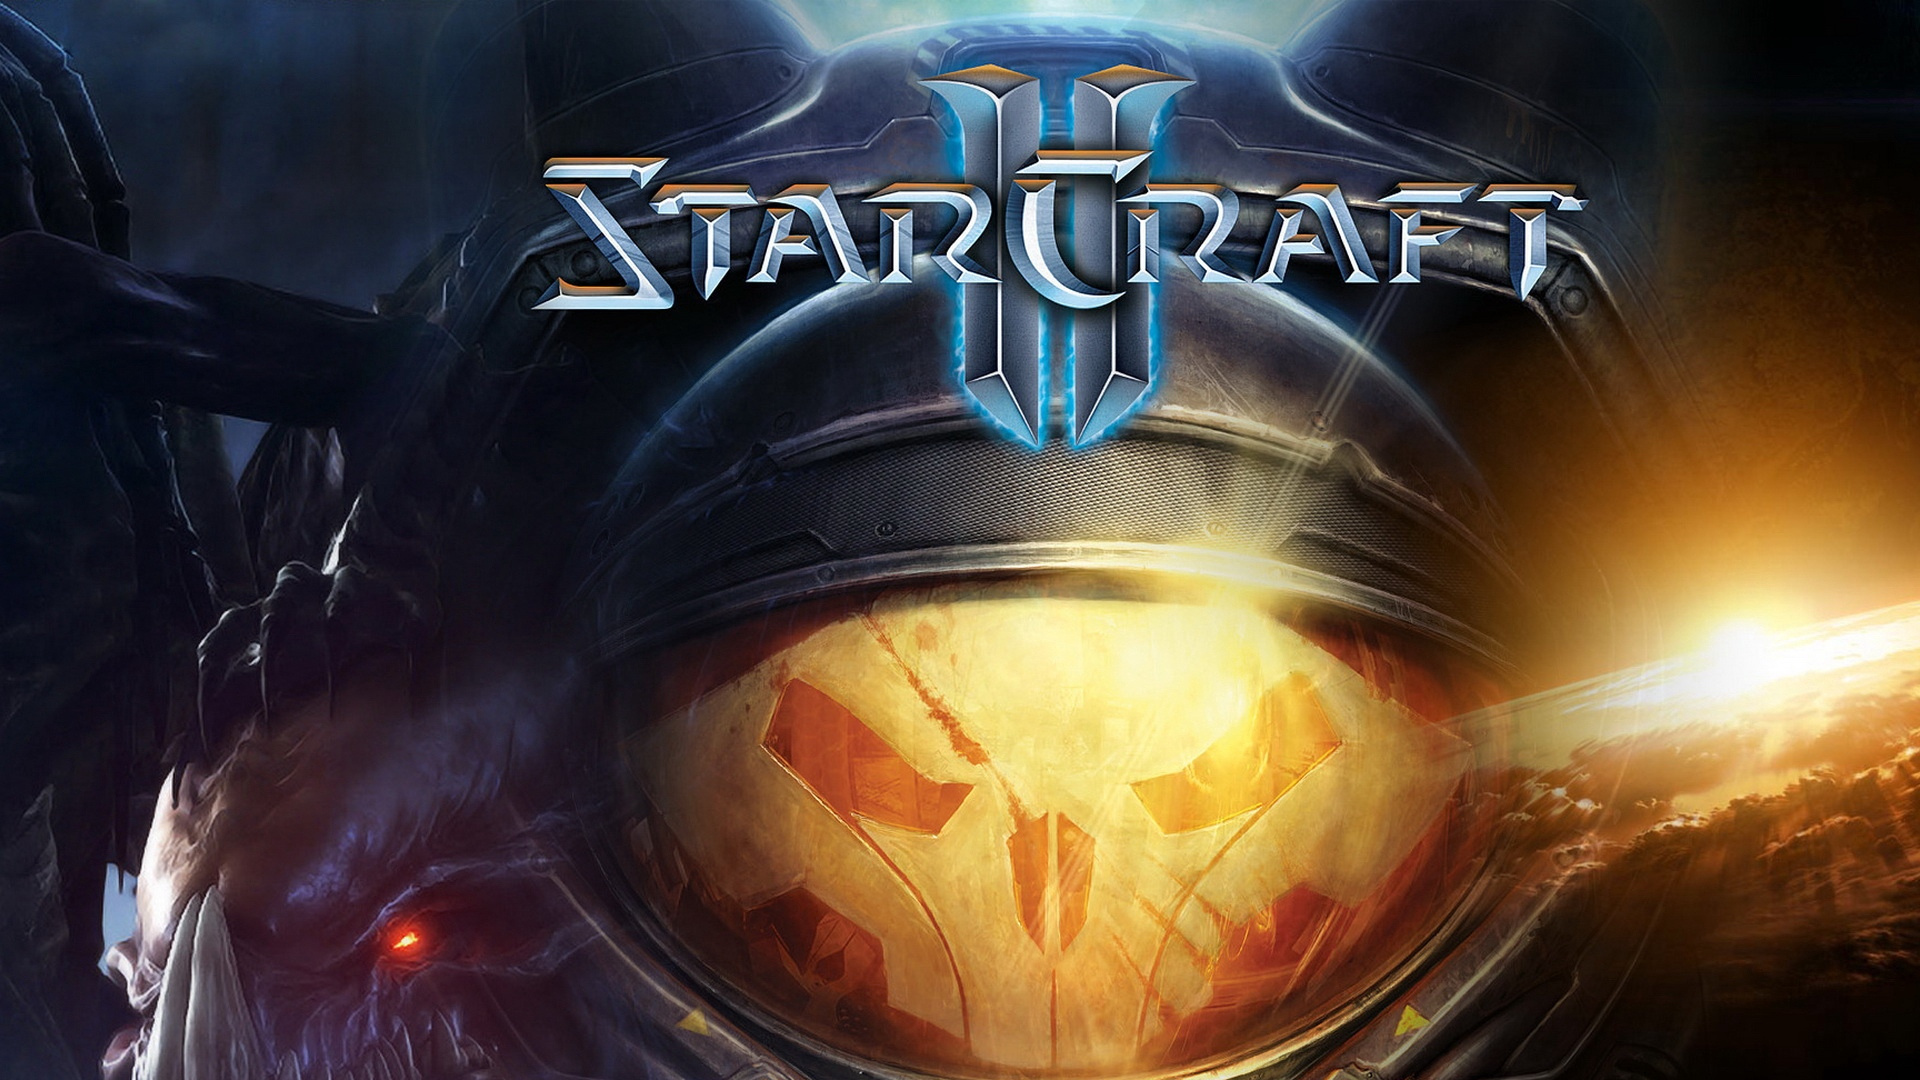 Starcraft ii Wings of Liberty, Starcraft, Adventure Game, pc Game, Games. Wallpaper in 1920x1080 Resolution